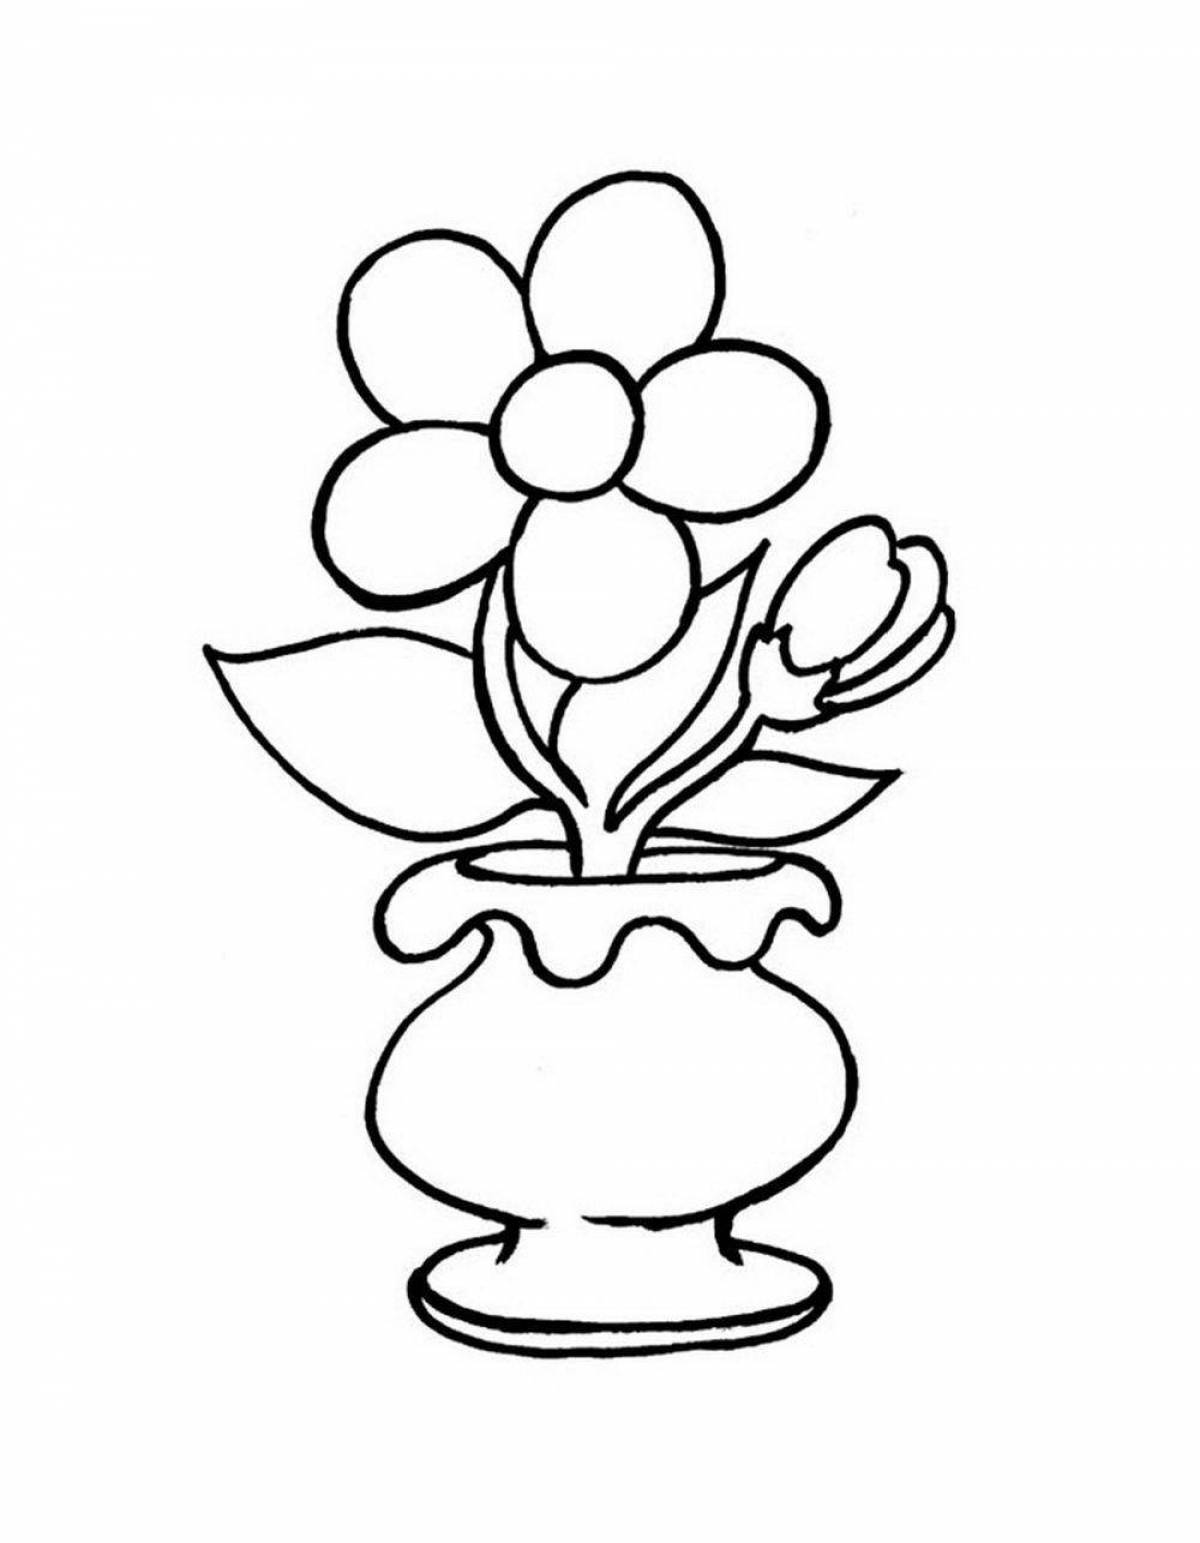 Shining vase of flowers coloring book for children